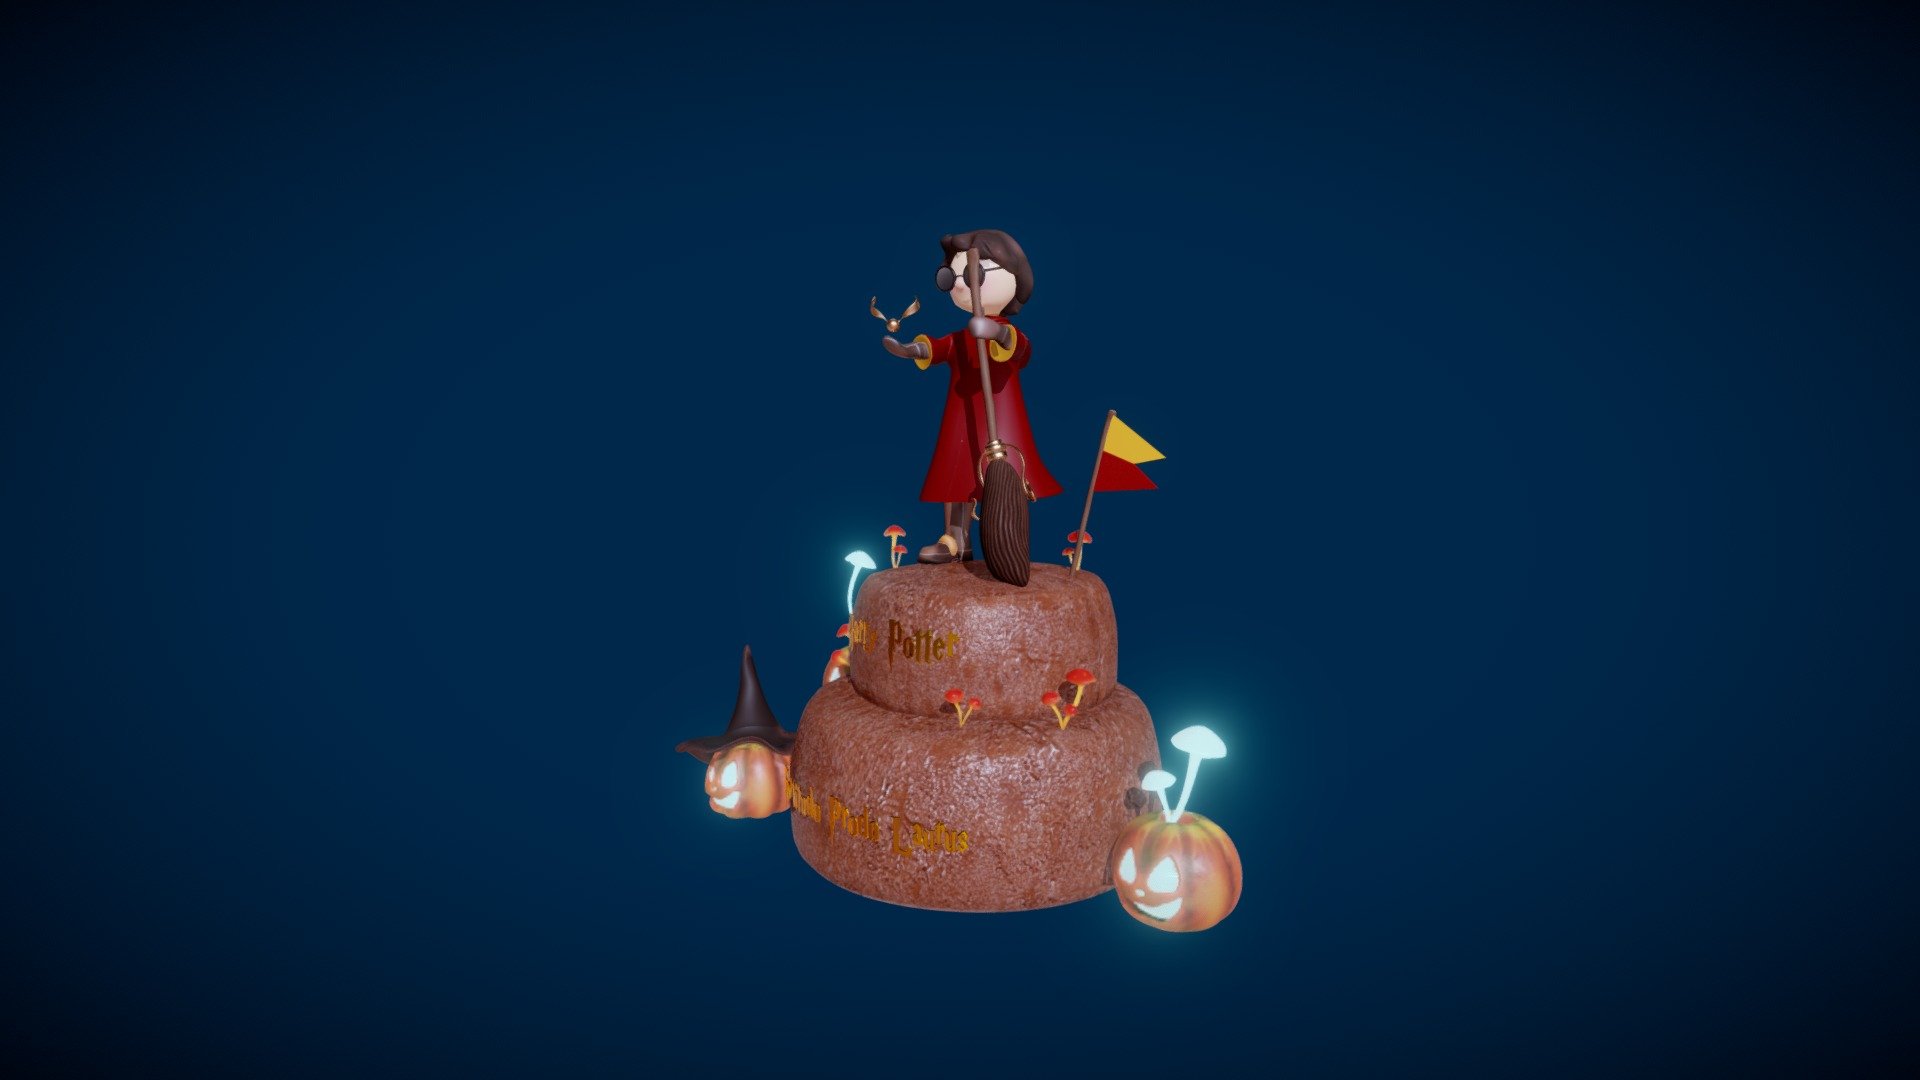 &lsquo;Harry Potter Cake' is a 3D model of a two-layer chocolate cake decorated with a stylized figure of Harry Potter character in his Quidditich team robe. The decoration also includes Quidditch flag, a flying broom, mushrooms, and evil pumpkins with poisonous, bioluminescent fungi.

*Artistic and Technical Attributes: * Most textures in the file are painted by me. A few textures have been retouched. This is a PBR model. Elements of the model relevant to PBR texturing have these maps: Albedo, Ambient Occlusion, Specularity, and Normal maps. The model is at the centre of the scene. All objects, materials, and textures have proper corresponding names .The mesh is subdivion ready and it does not come as a single mesh. This makes manipulation and further editing much easier.

If you have any suggestions on making this a better model, please feel free to share any ideas! Also, if you need help with anything regarding this model, please do not hestitate to contact me.

Thank you very much and have a good day! - Harry Potter Fantasy Cake - Buy Royalty Free 3D model by SuperWizard91 3d model